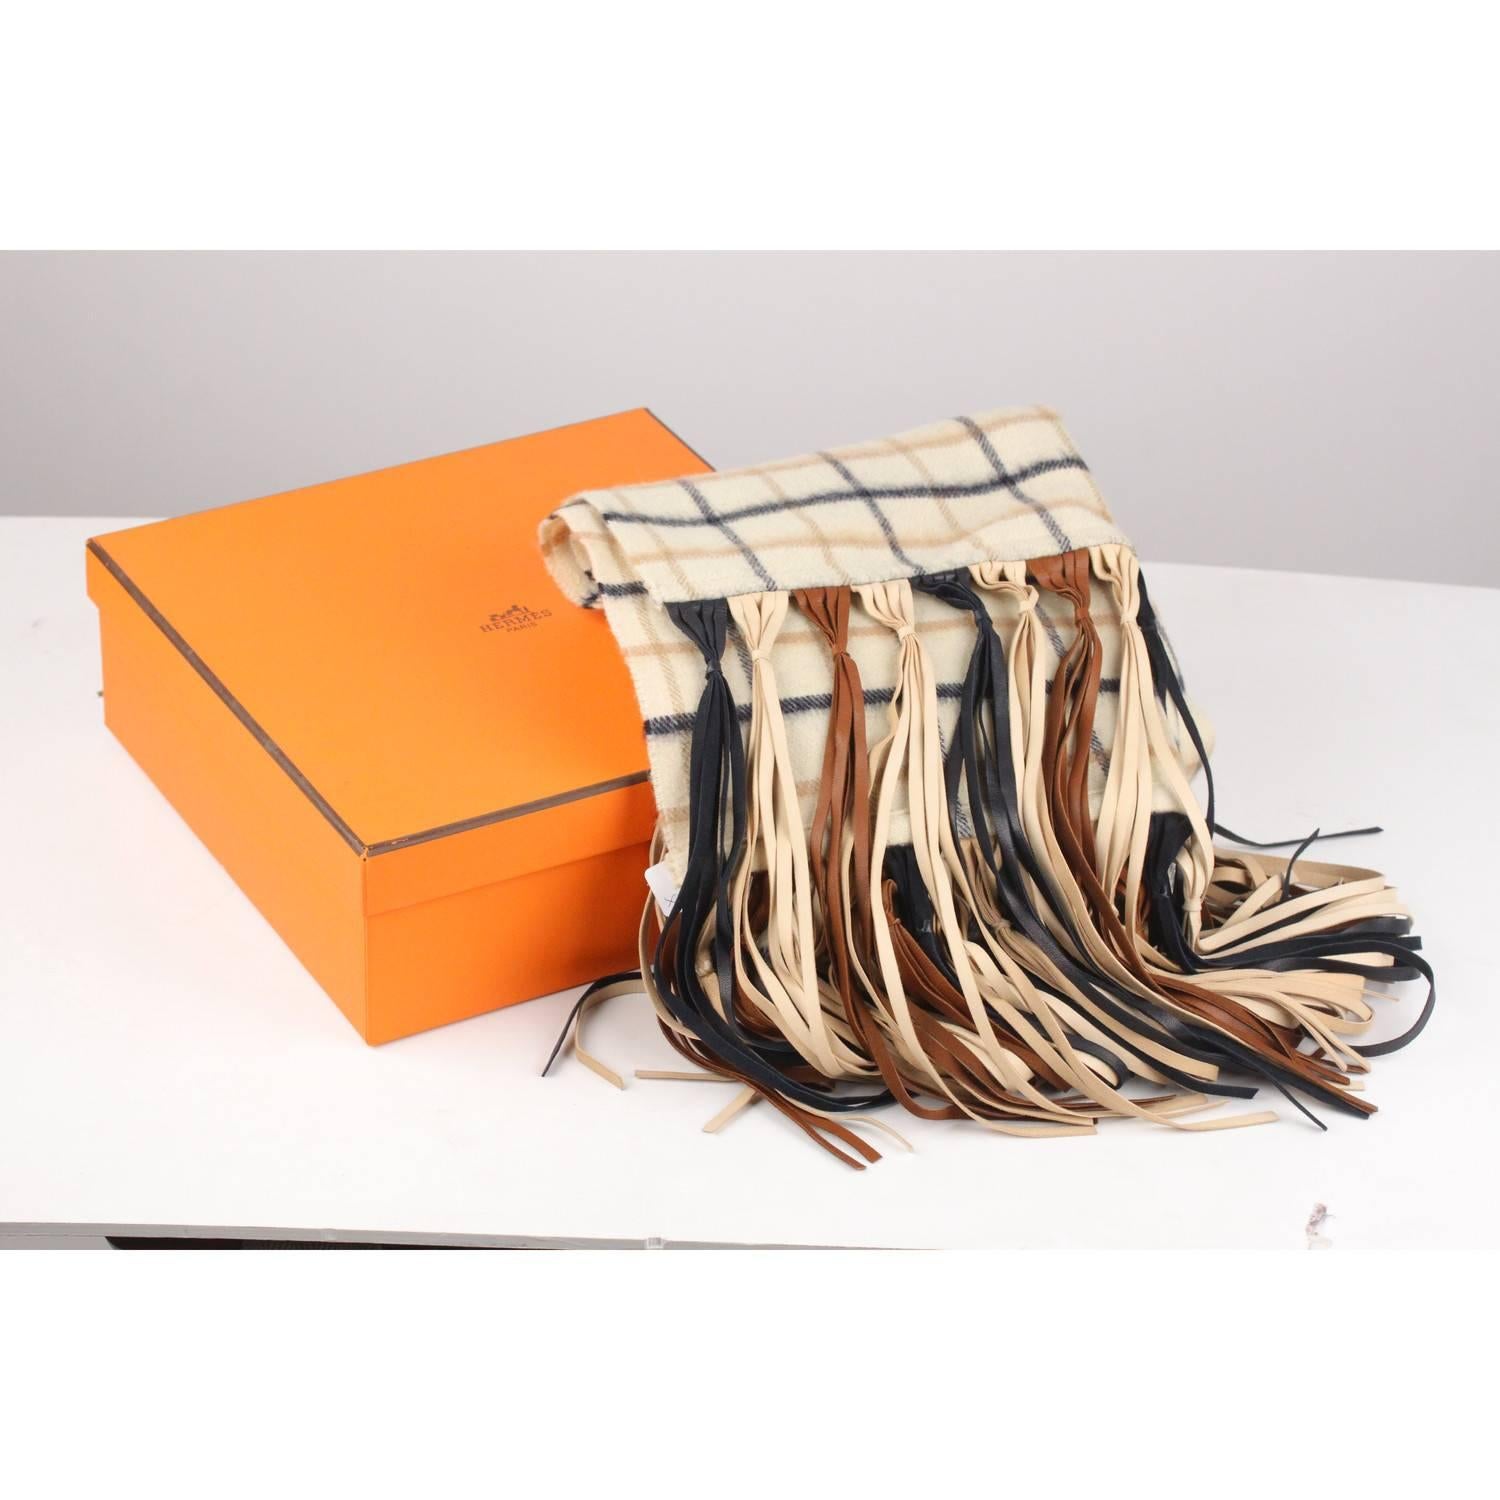 Beautiful Hermes vintage long scarf in cashmere and wool fabric. Checkered pattern on beige background. Multicolored long, knotted leather fringe on either end. Comes with HERMES box. Total lenght: 74 inches - 187 cm (excluding fringes)